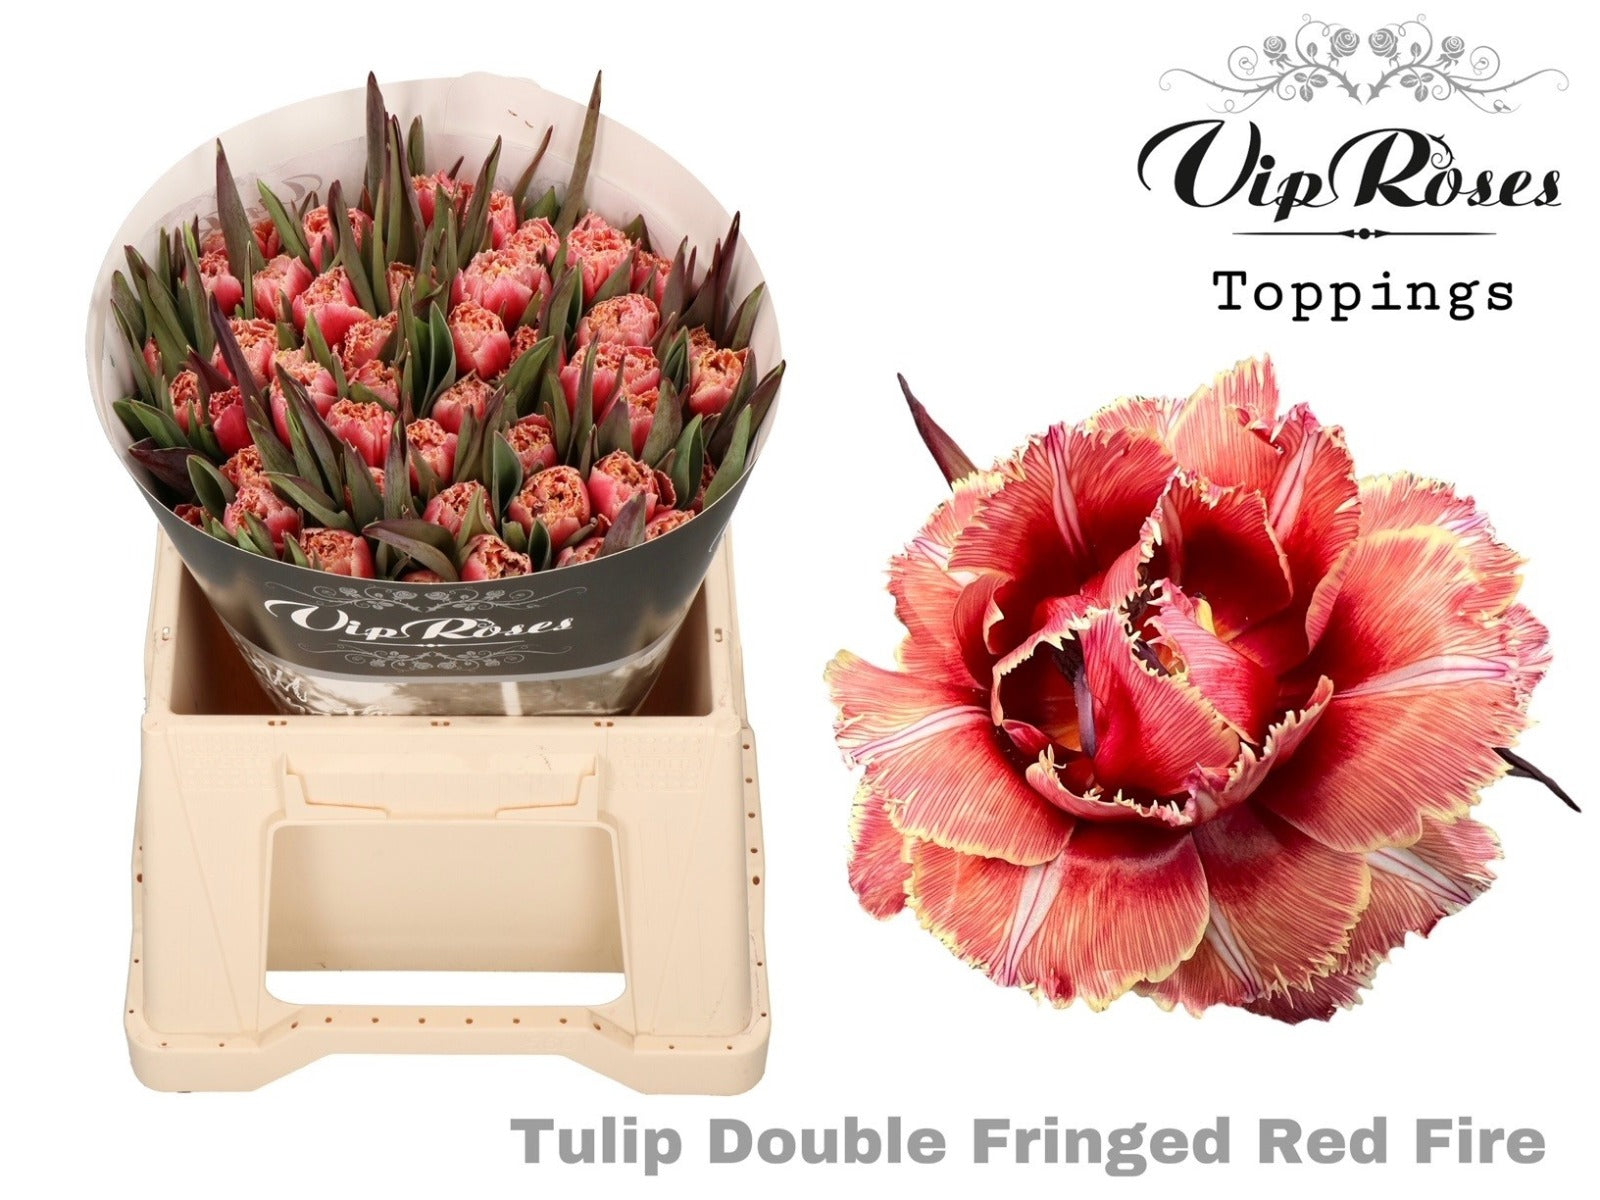 Tulpe "Double Fringed Red Fire"